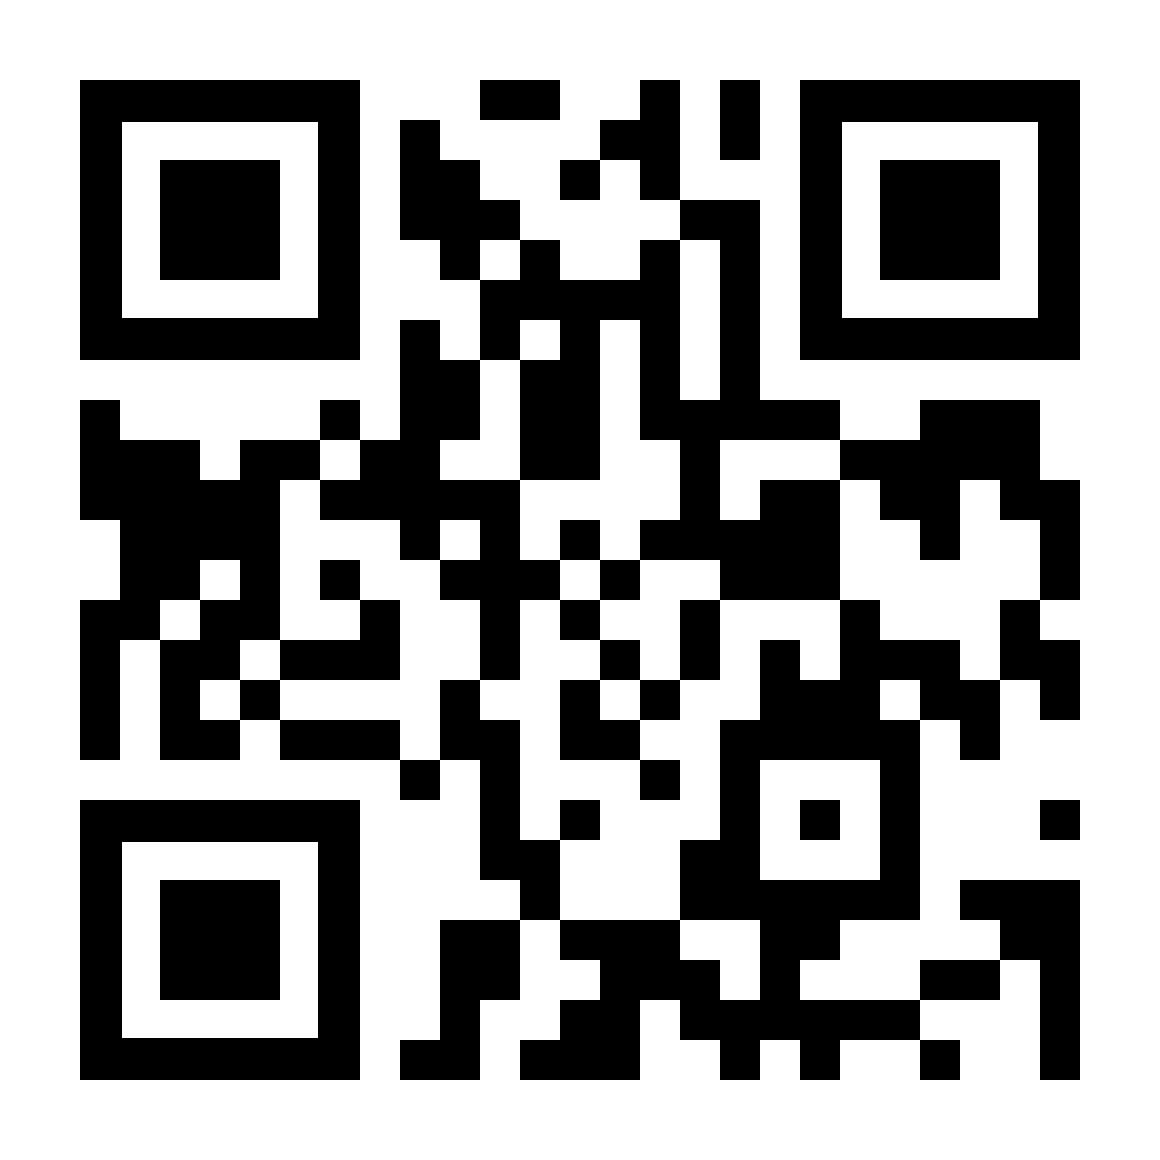 Scan the QR Code to link directly to the registration form